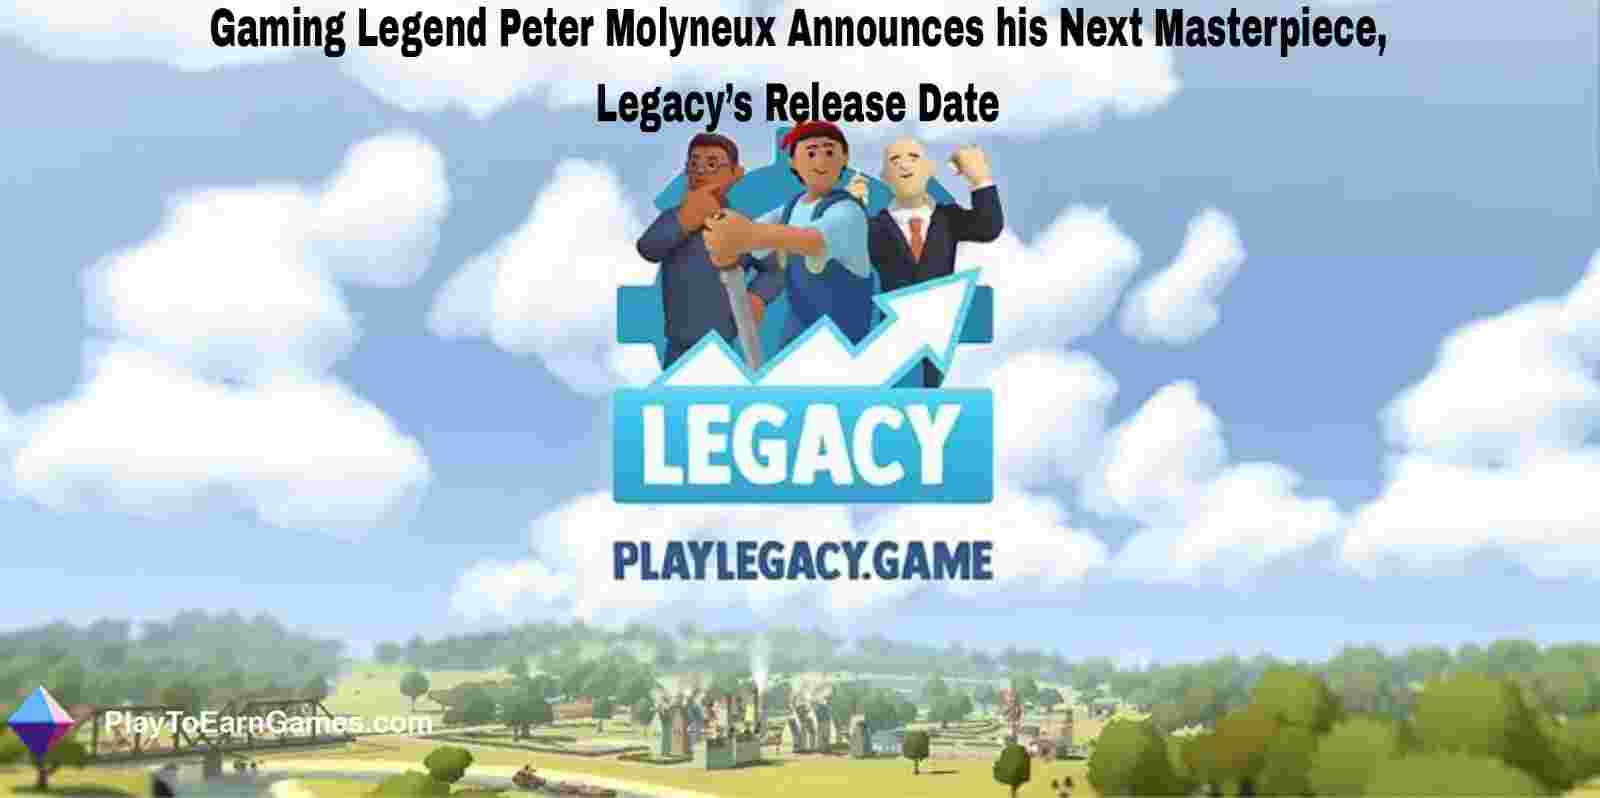 Peter Molyneux's "Legacy" Unveiled: Blockchain Gaming, NFTs, and the Rebirth of a Gaming Visionary